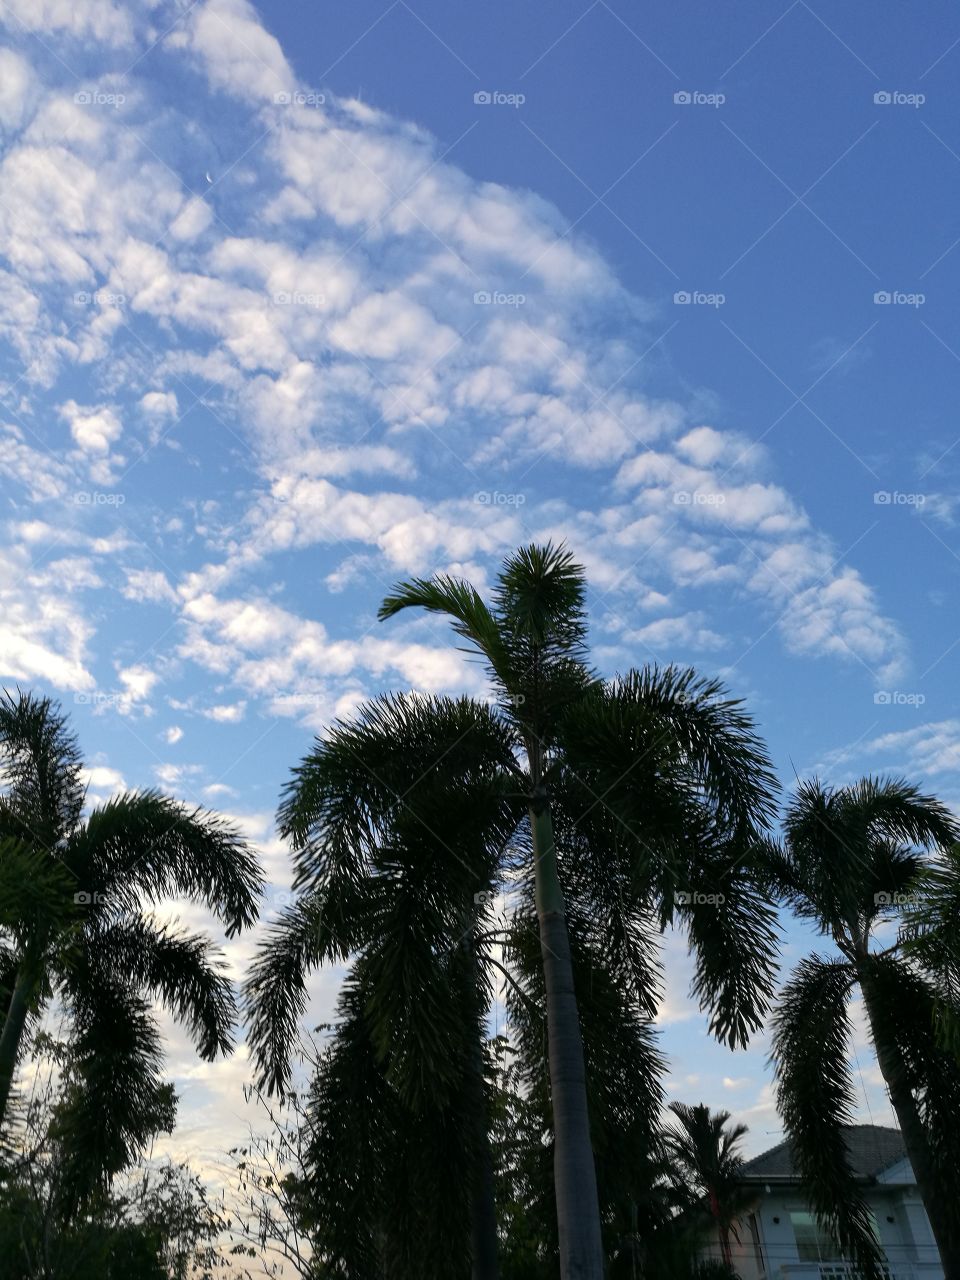 palm trees against beautiful clouds and blue sky